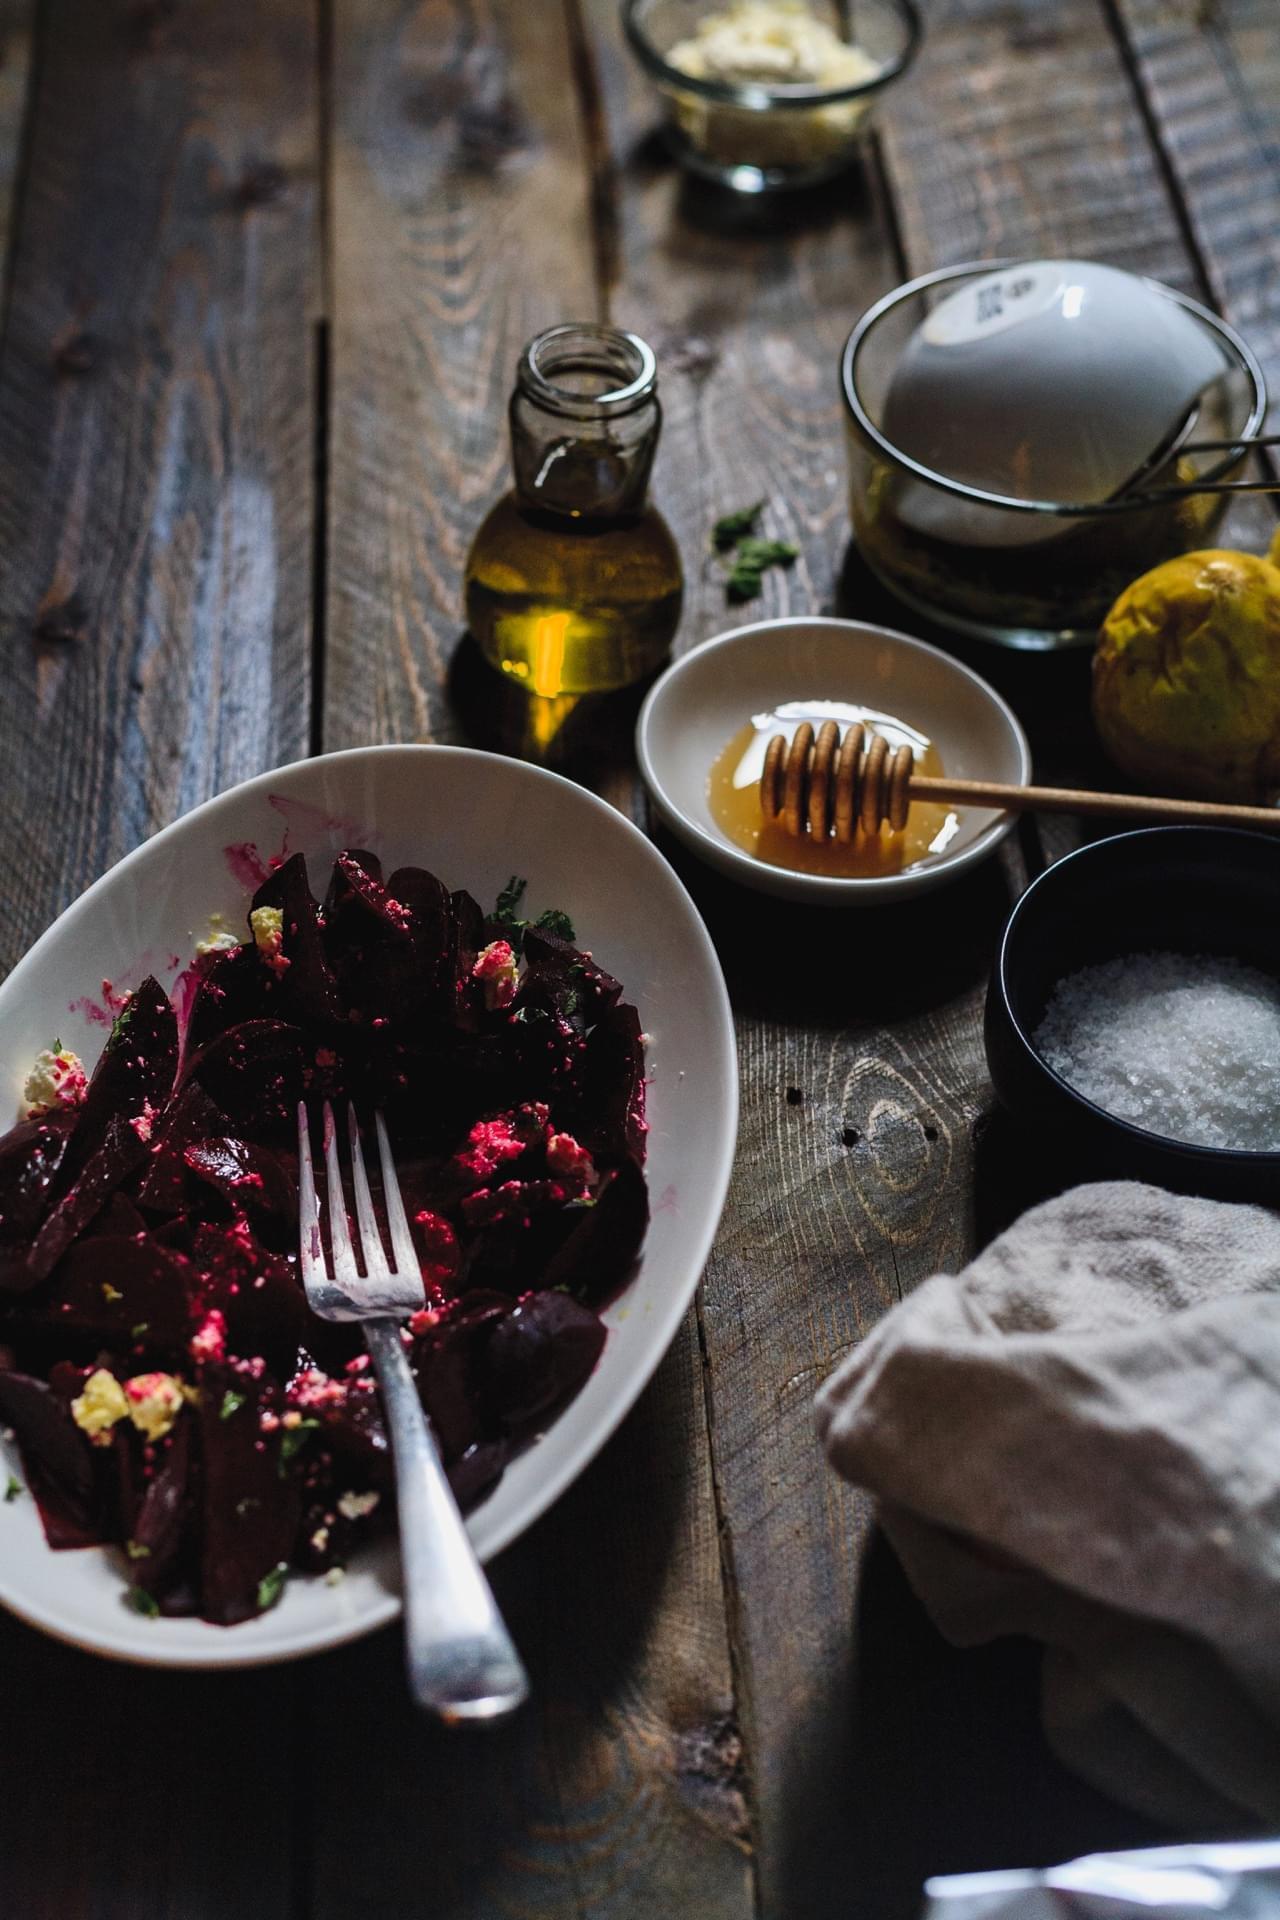 Beet salad with passionfruit dressing